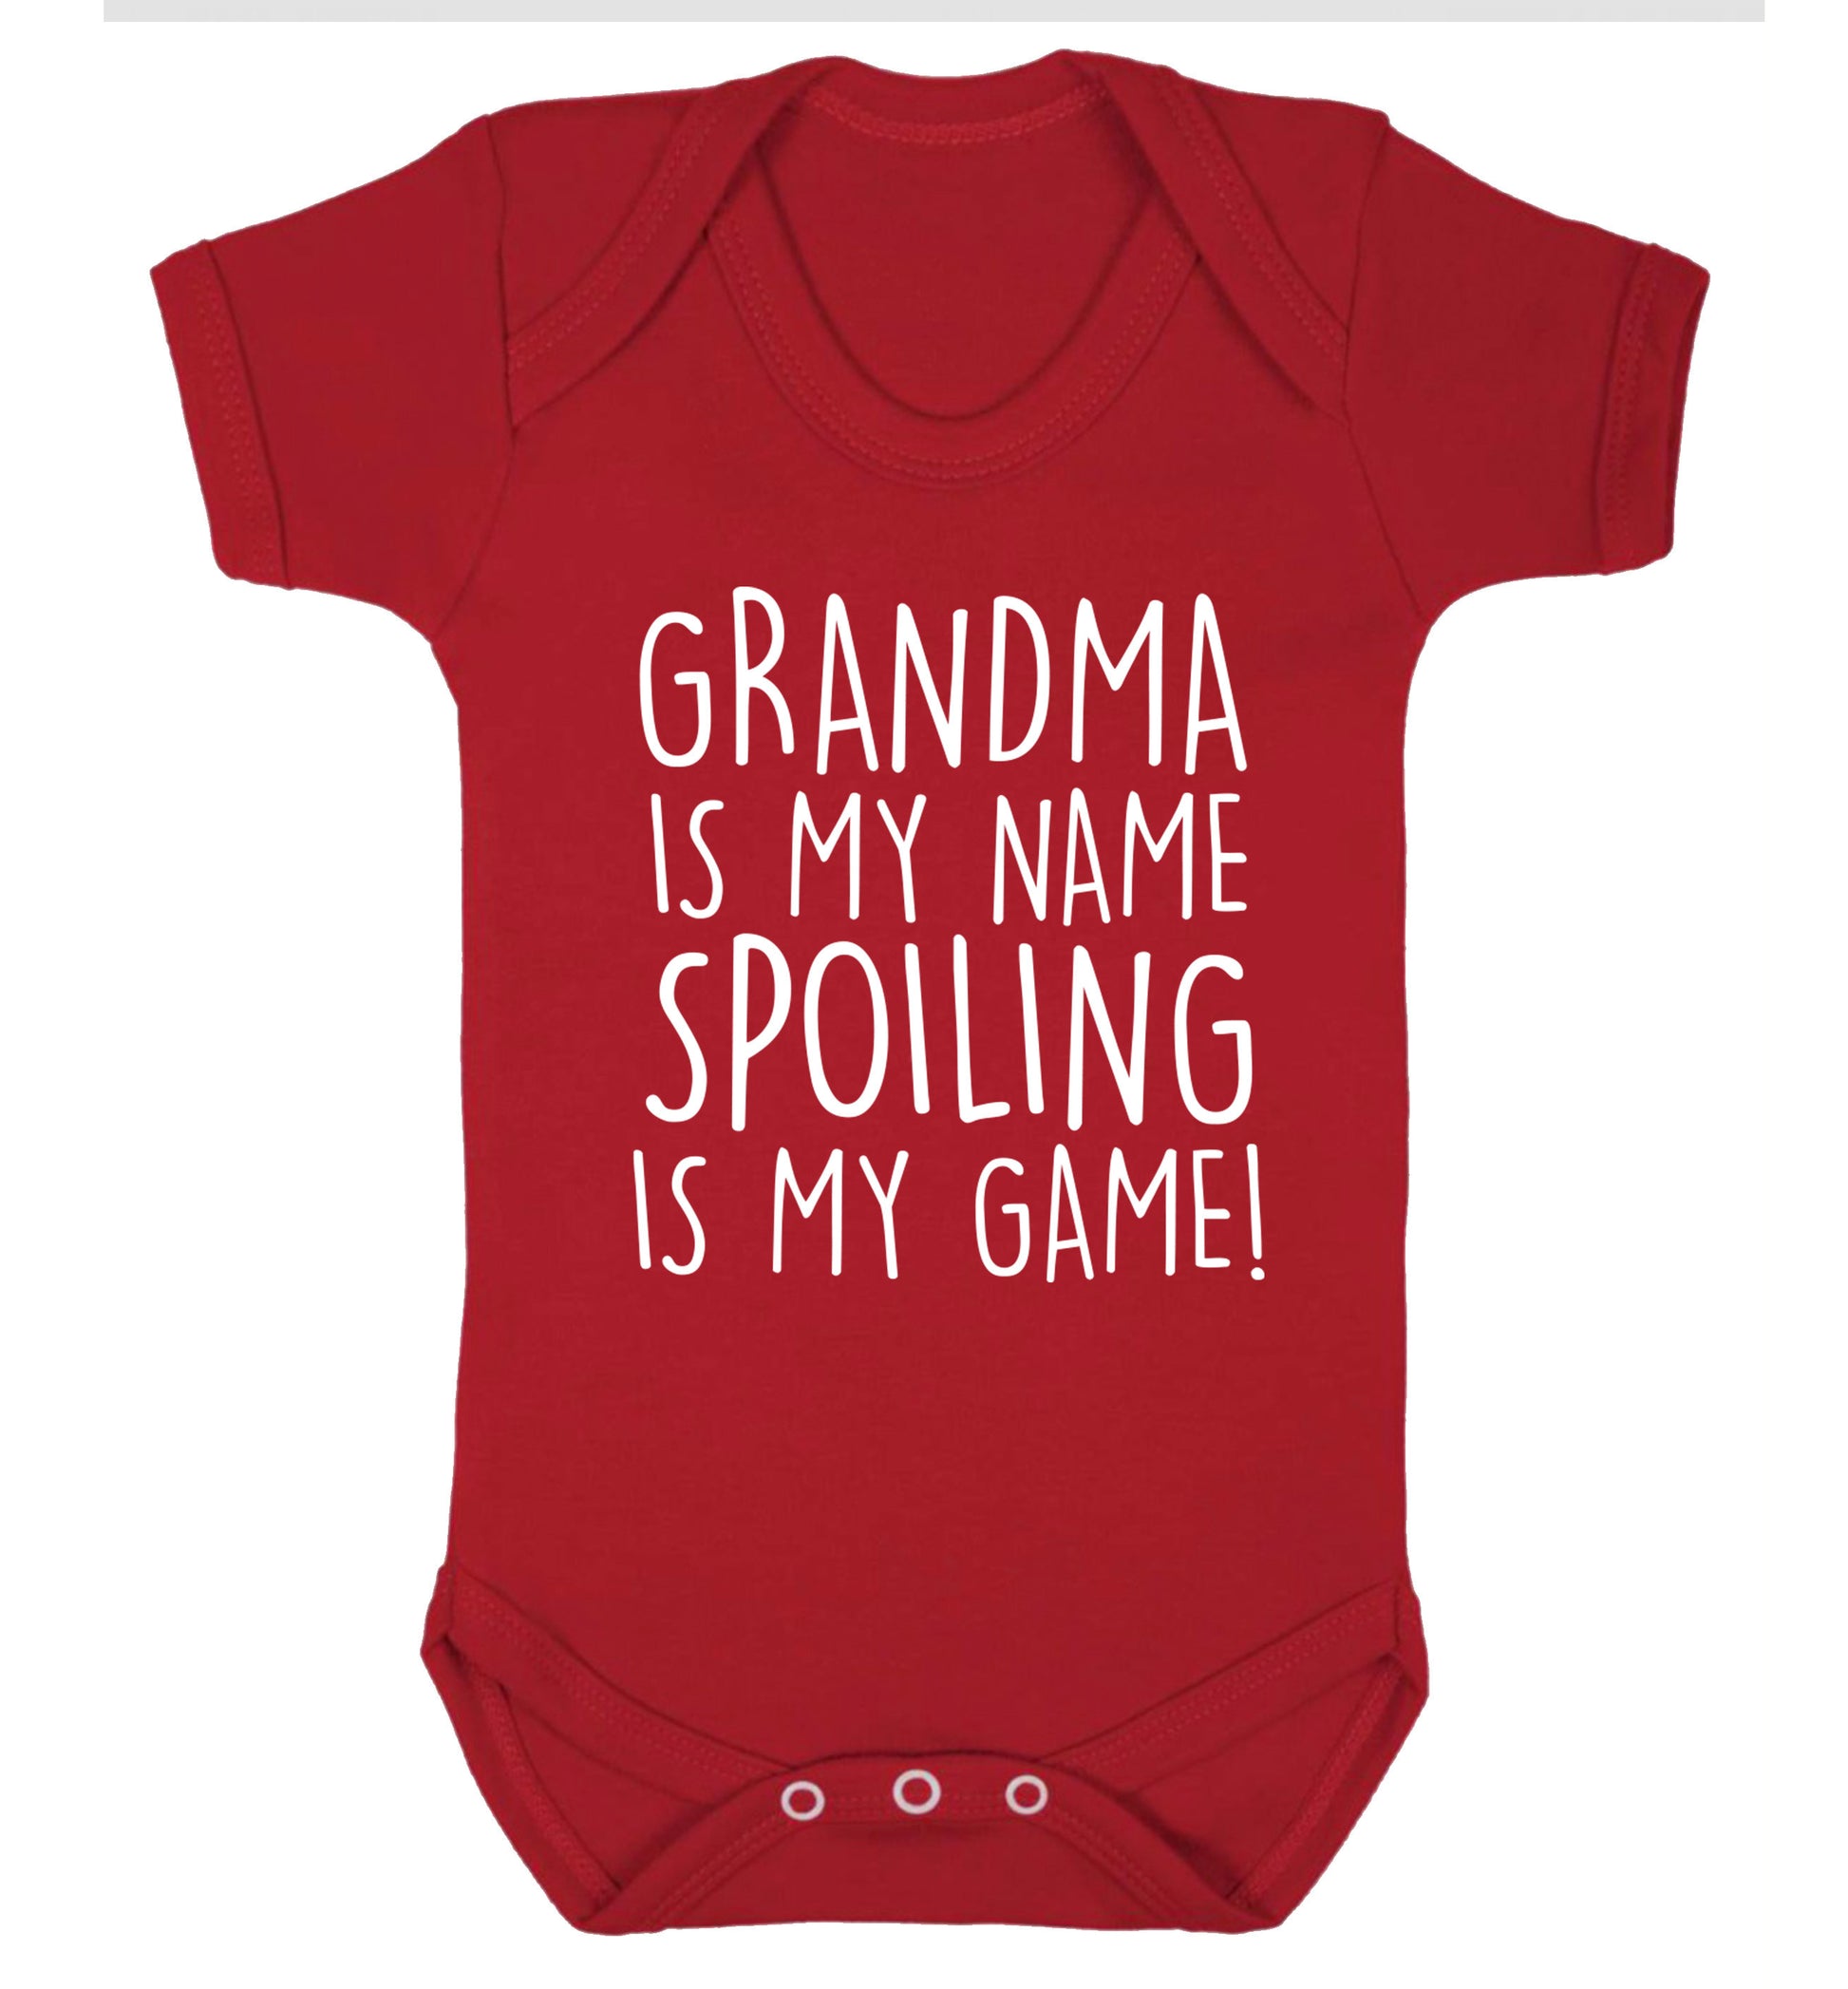 Grandma is my name, spoiling is my game Baby Vest red 18-24 months